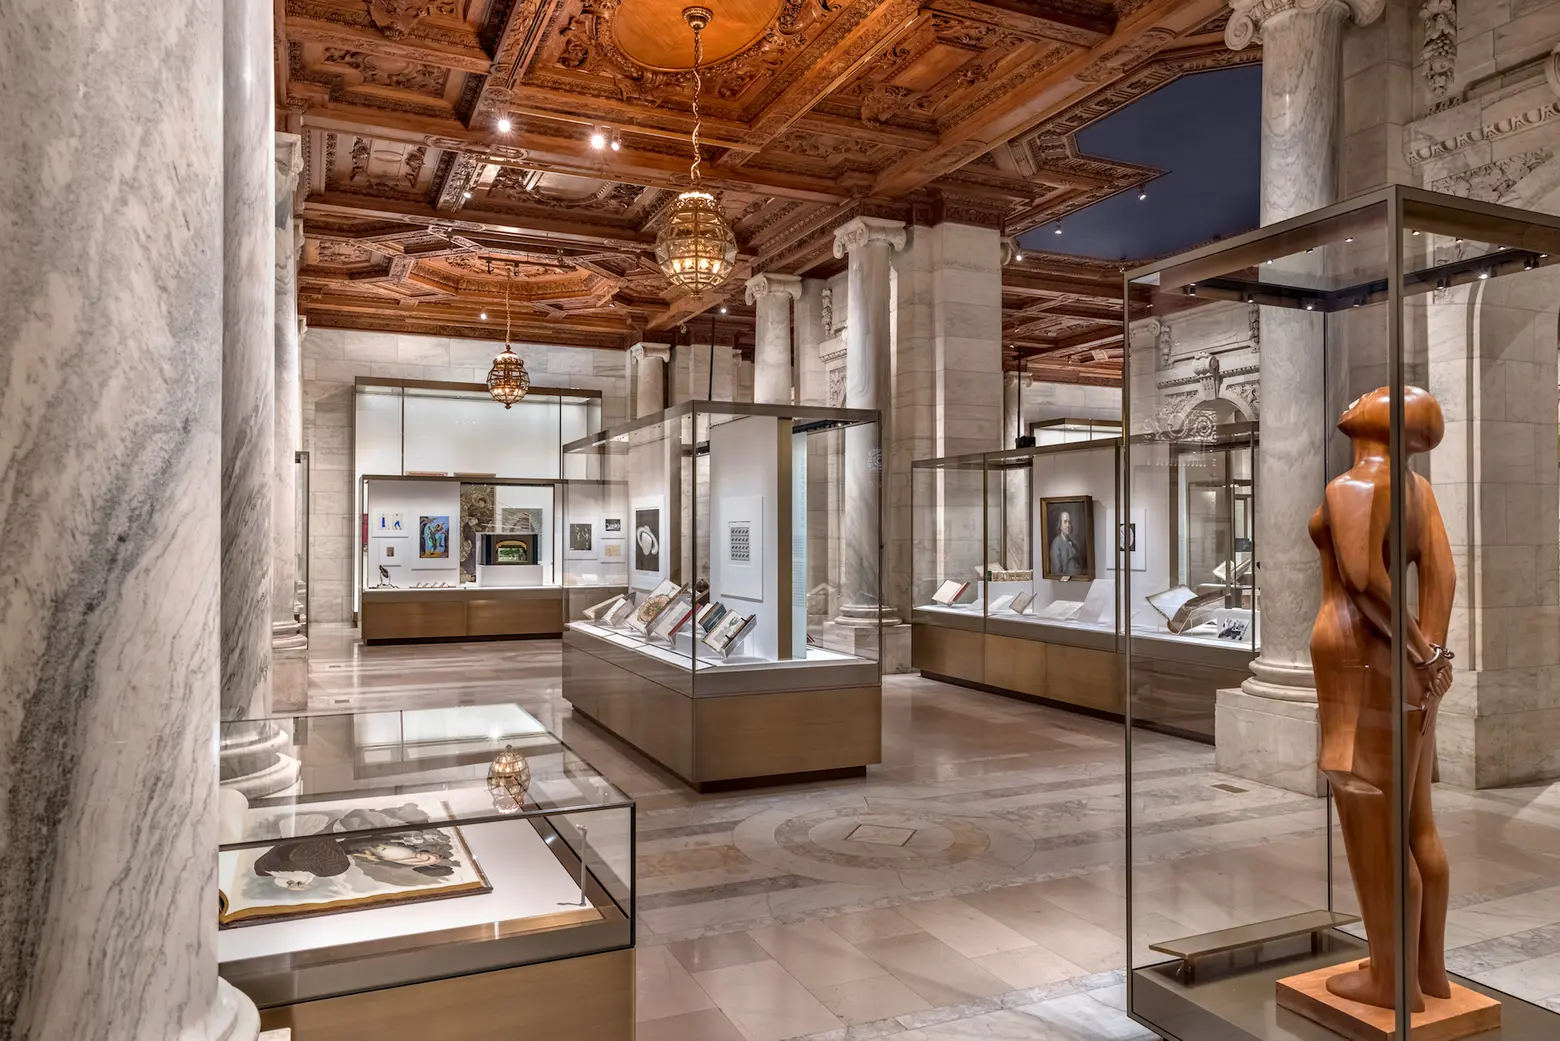 7 historic treasures to check out at the new NYPL exhibit